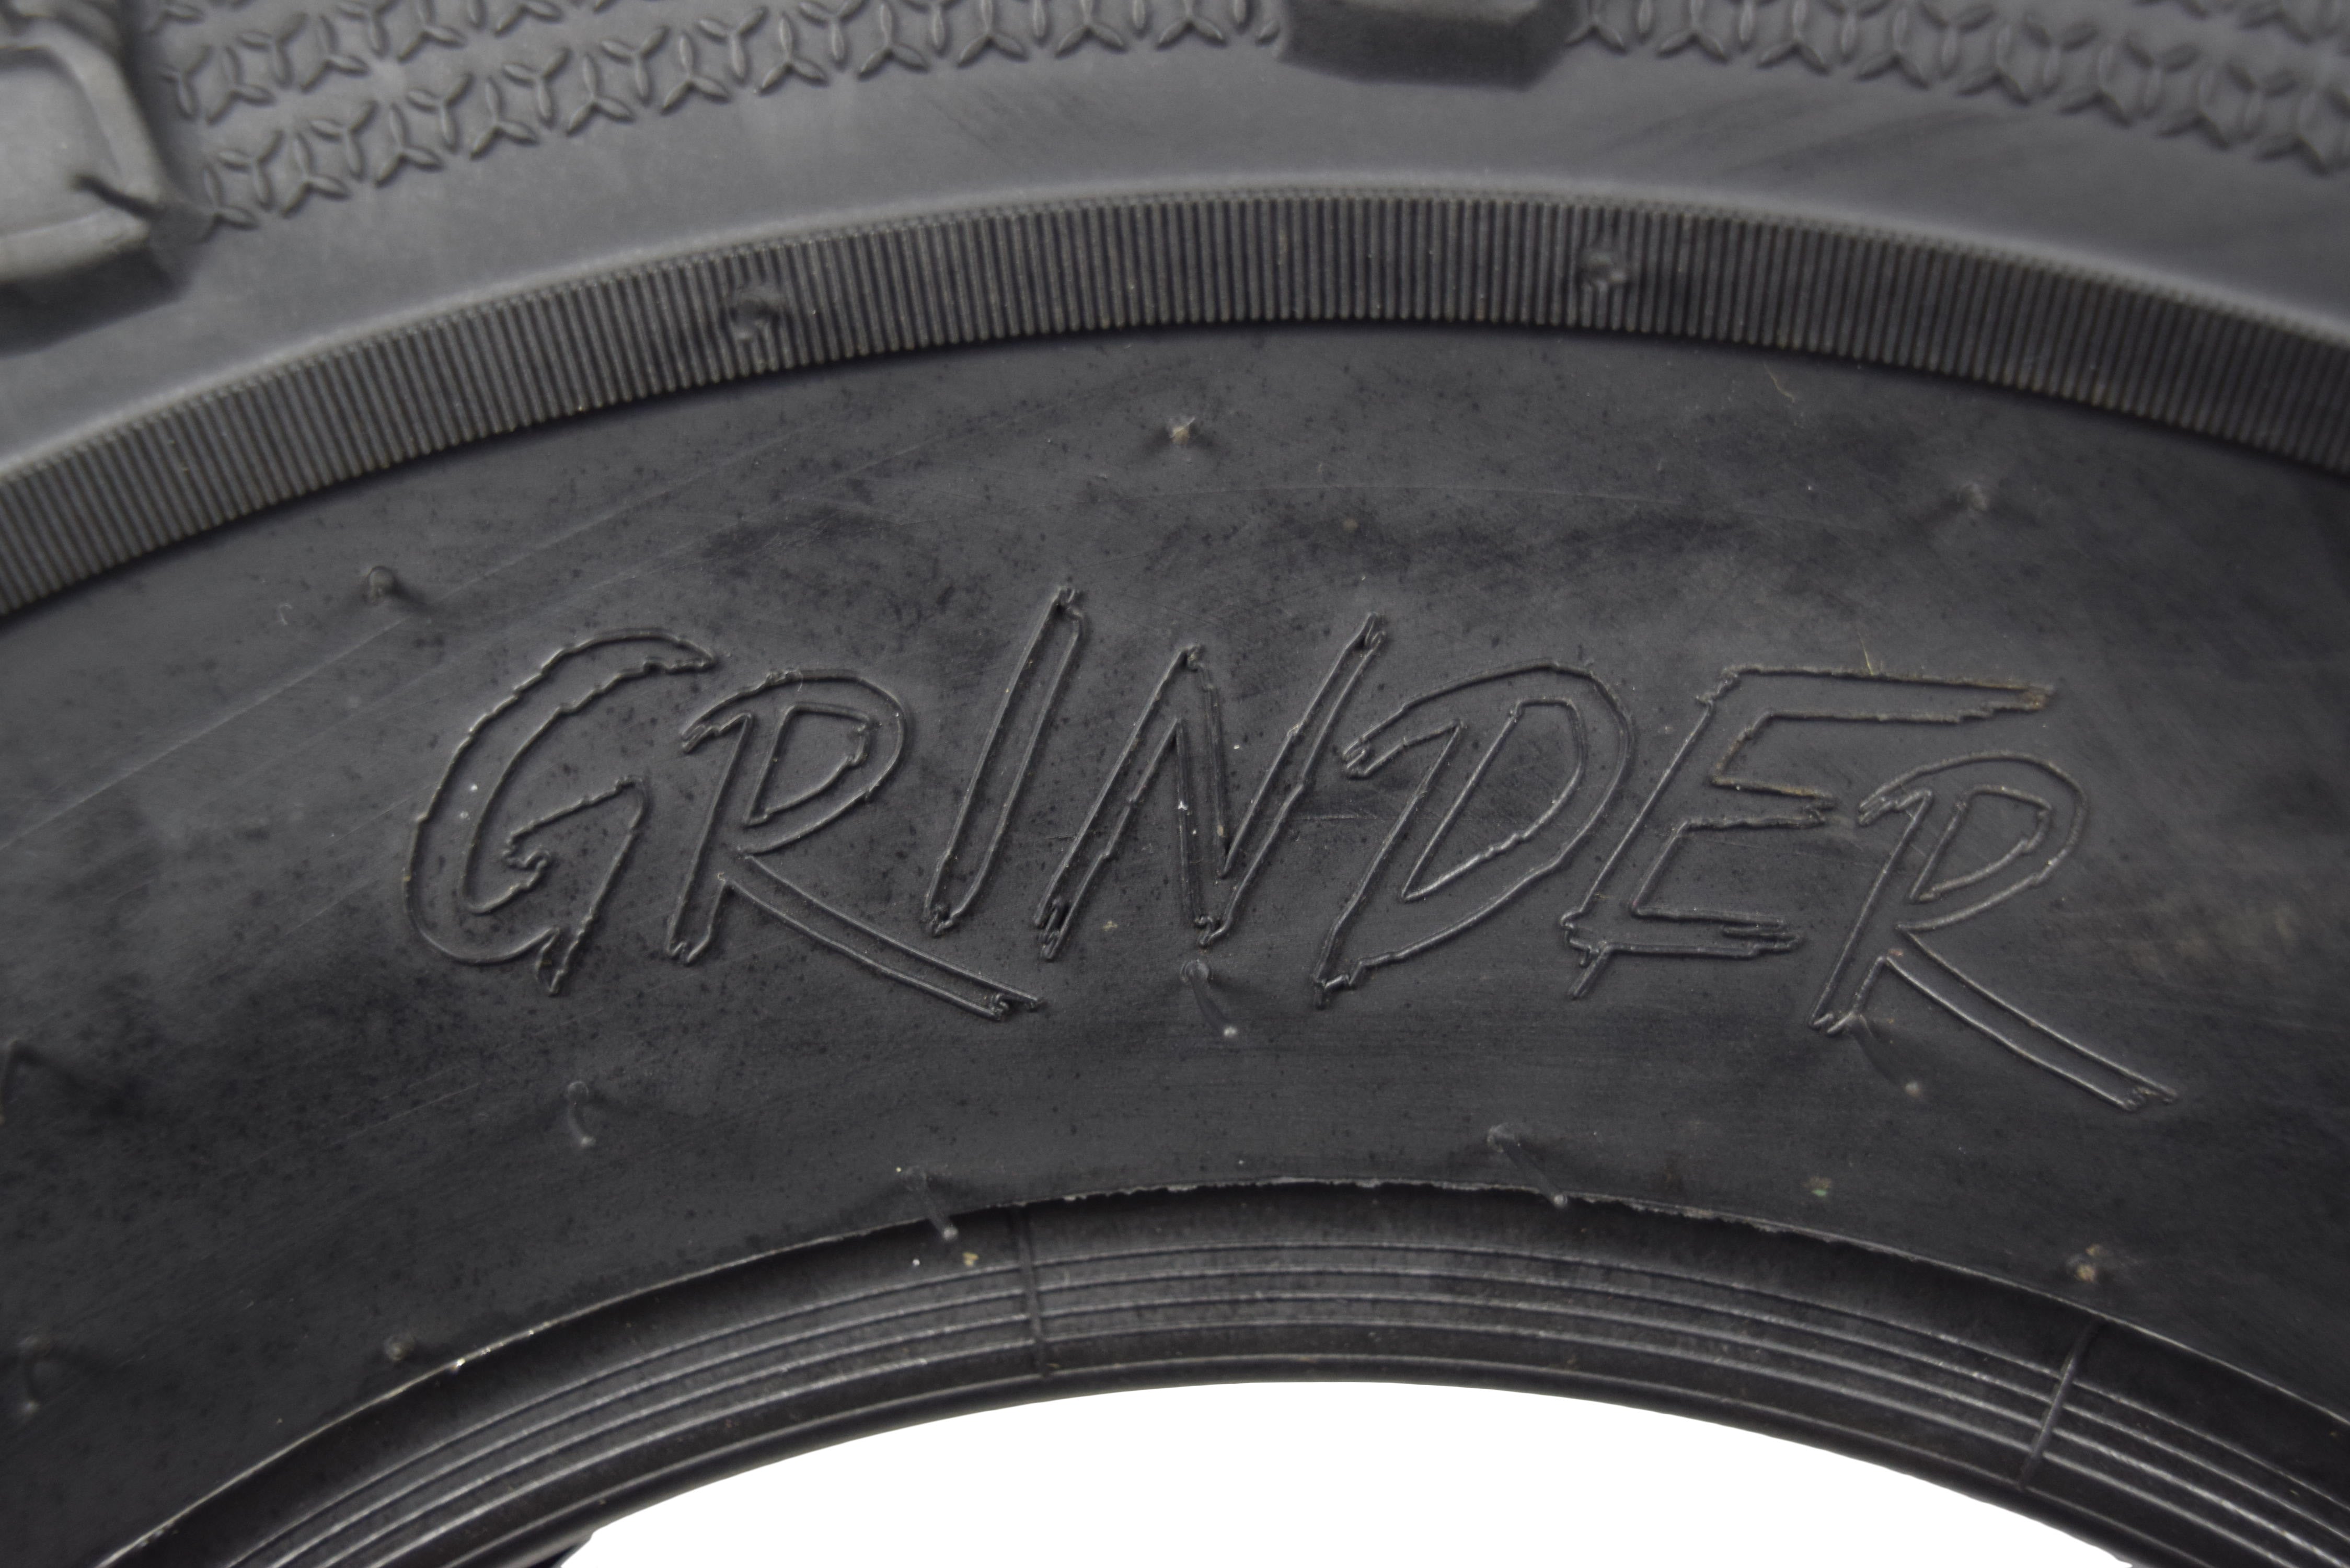 MASSFX-Grinder-22x7-11-Dual-Compound-6-PLY-Front-ATV-Tire-image-3